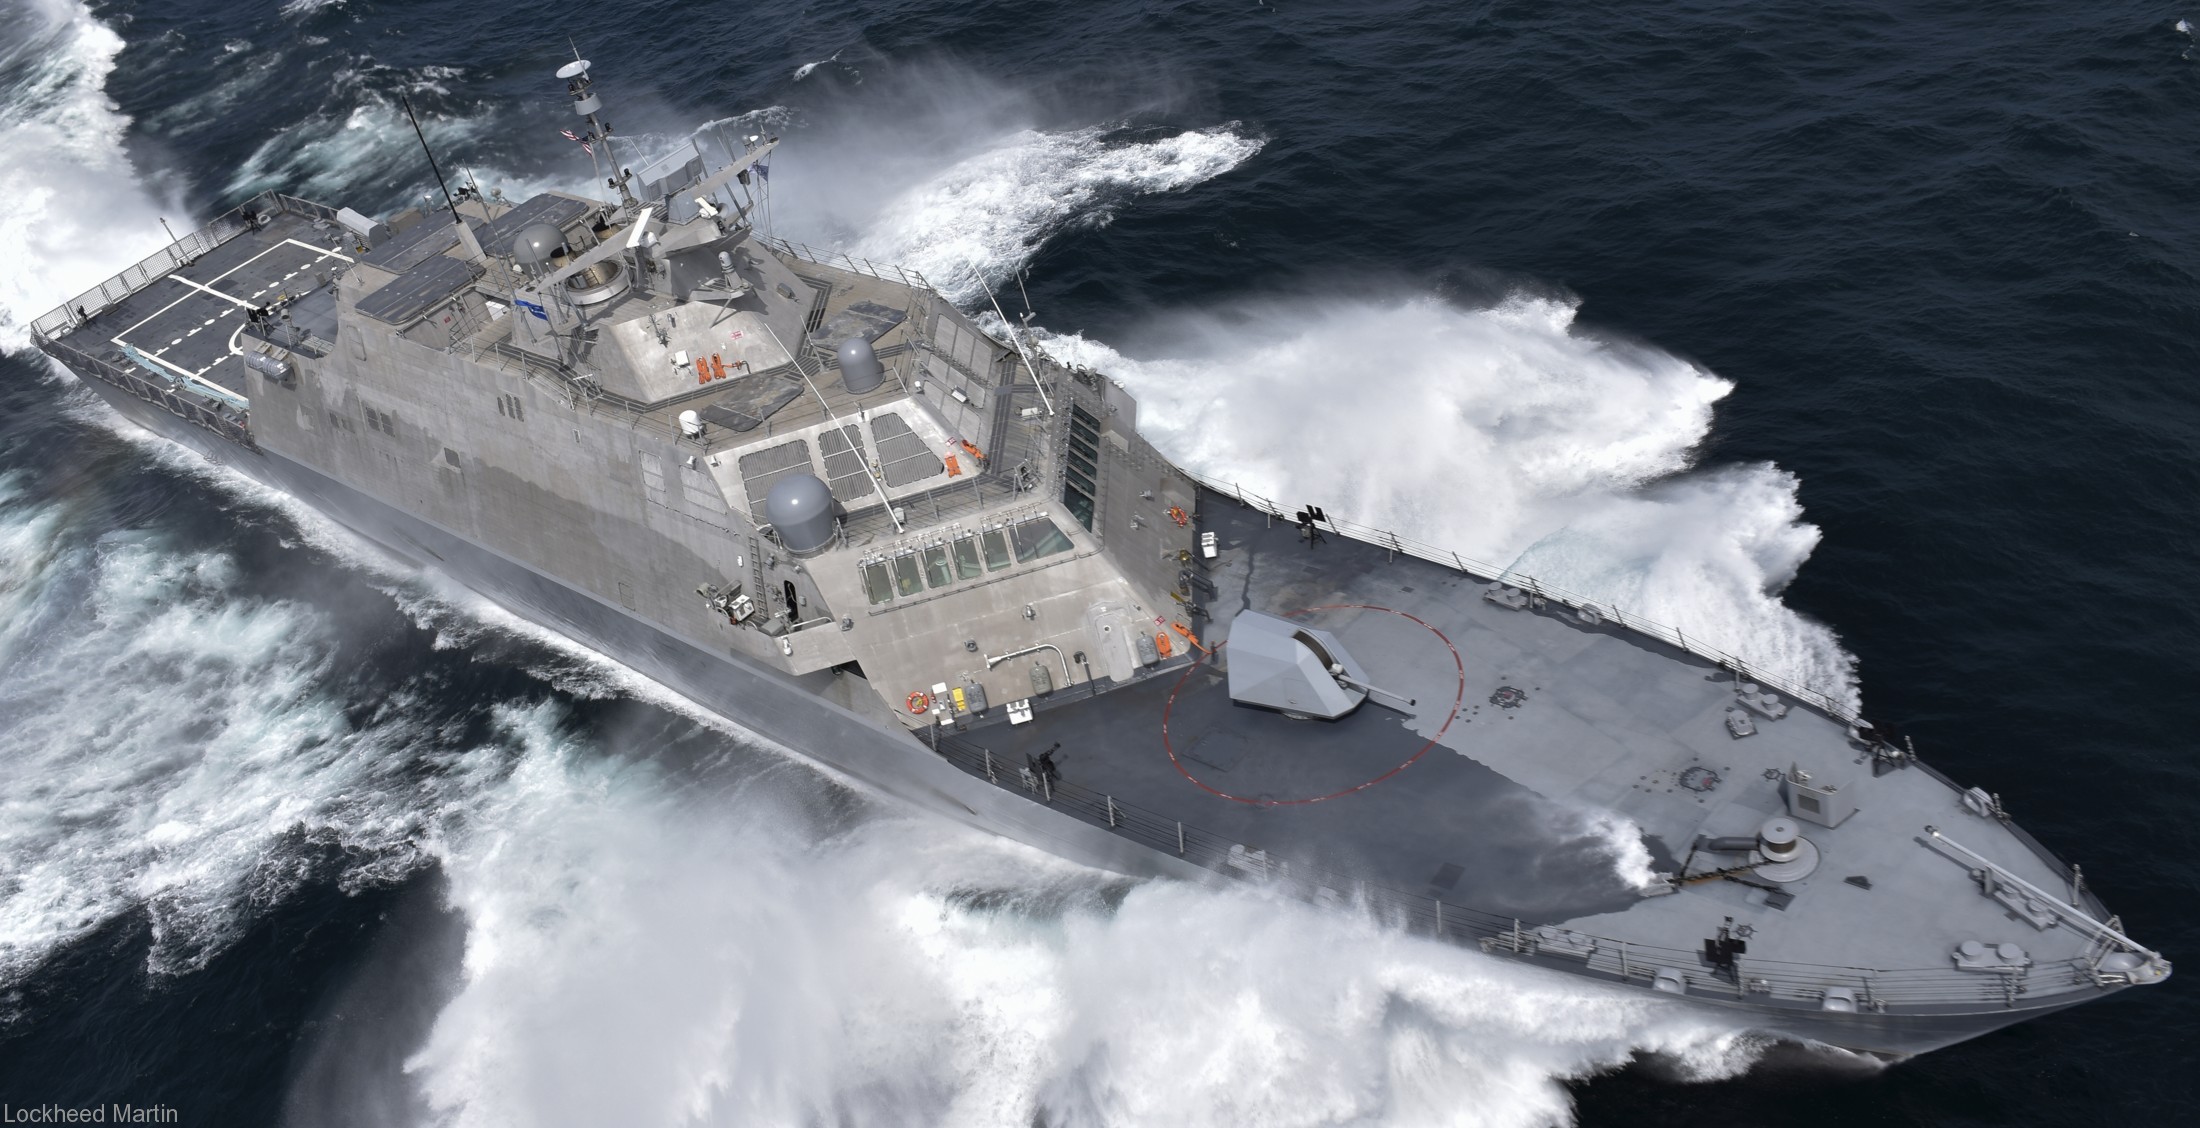 lcs-7 uss detroit freedom class littoral combat ship us navy 23 acceptance trials lake michigan